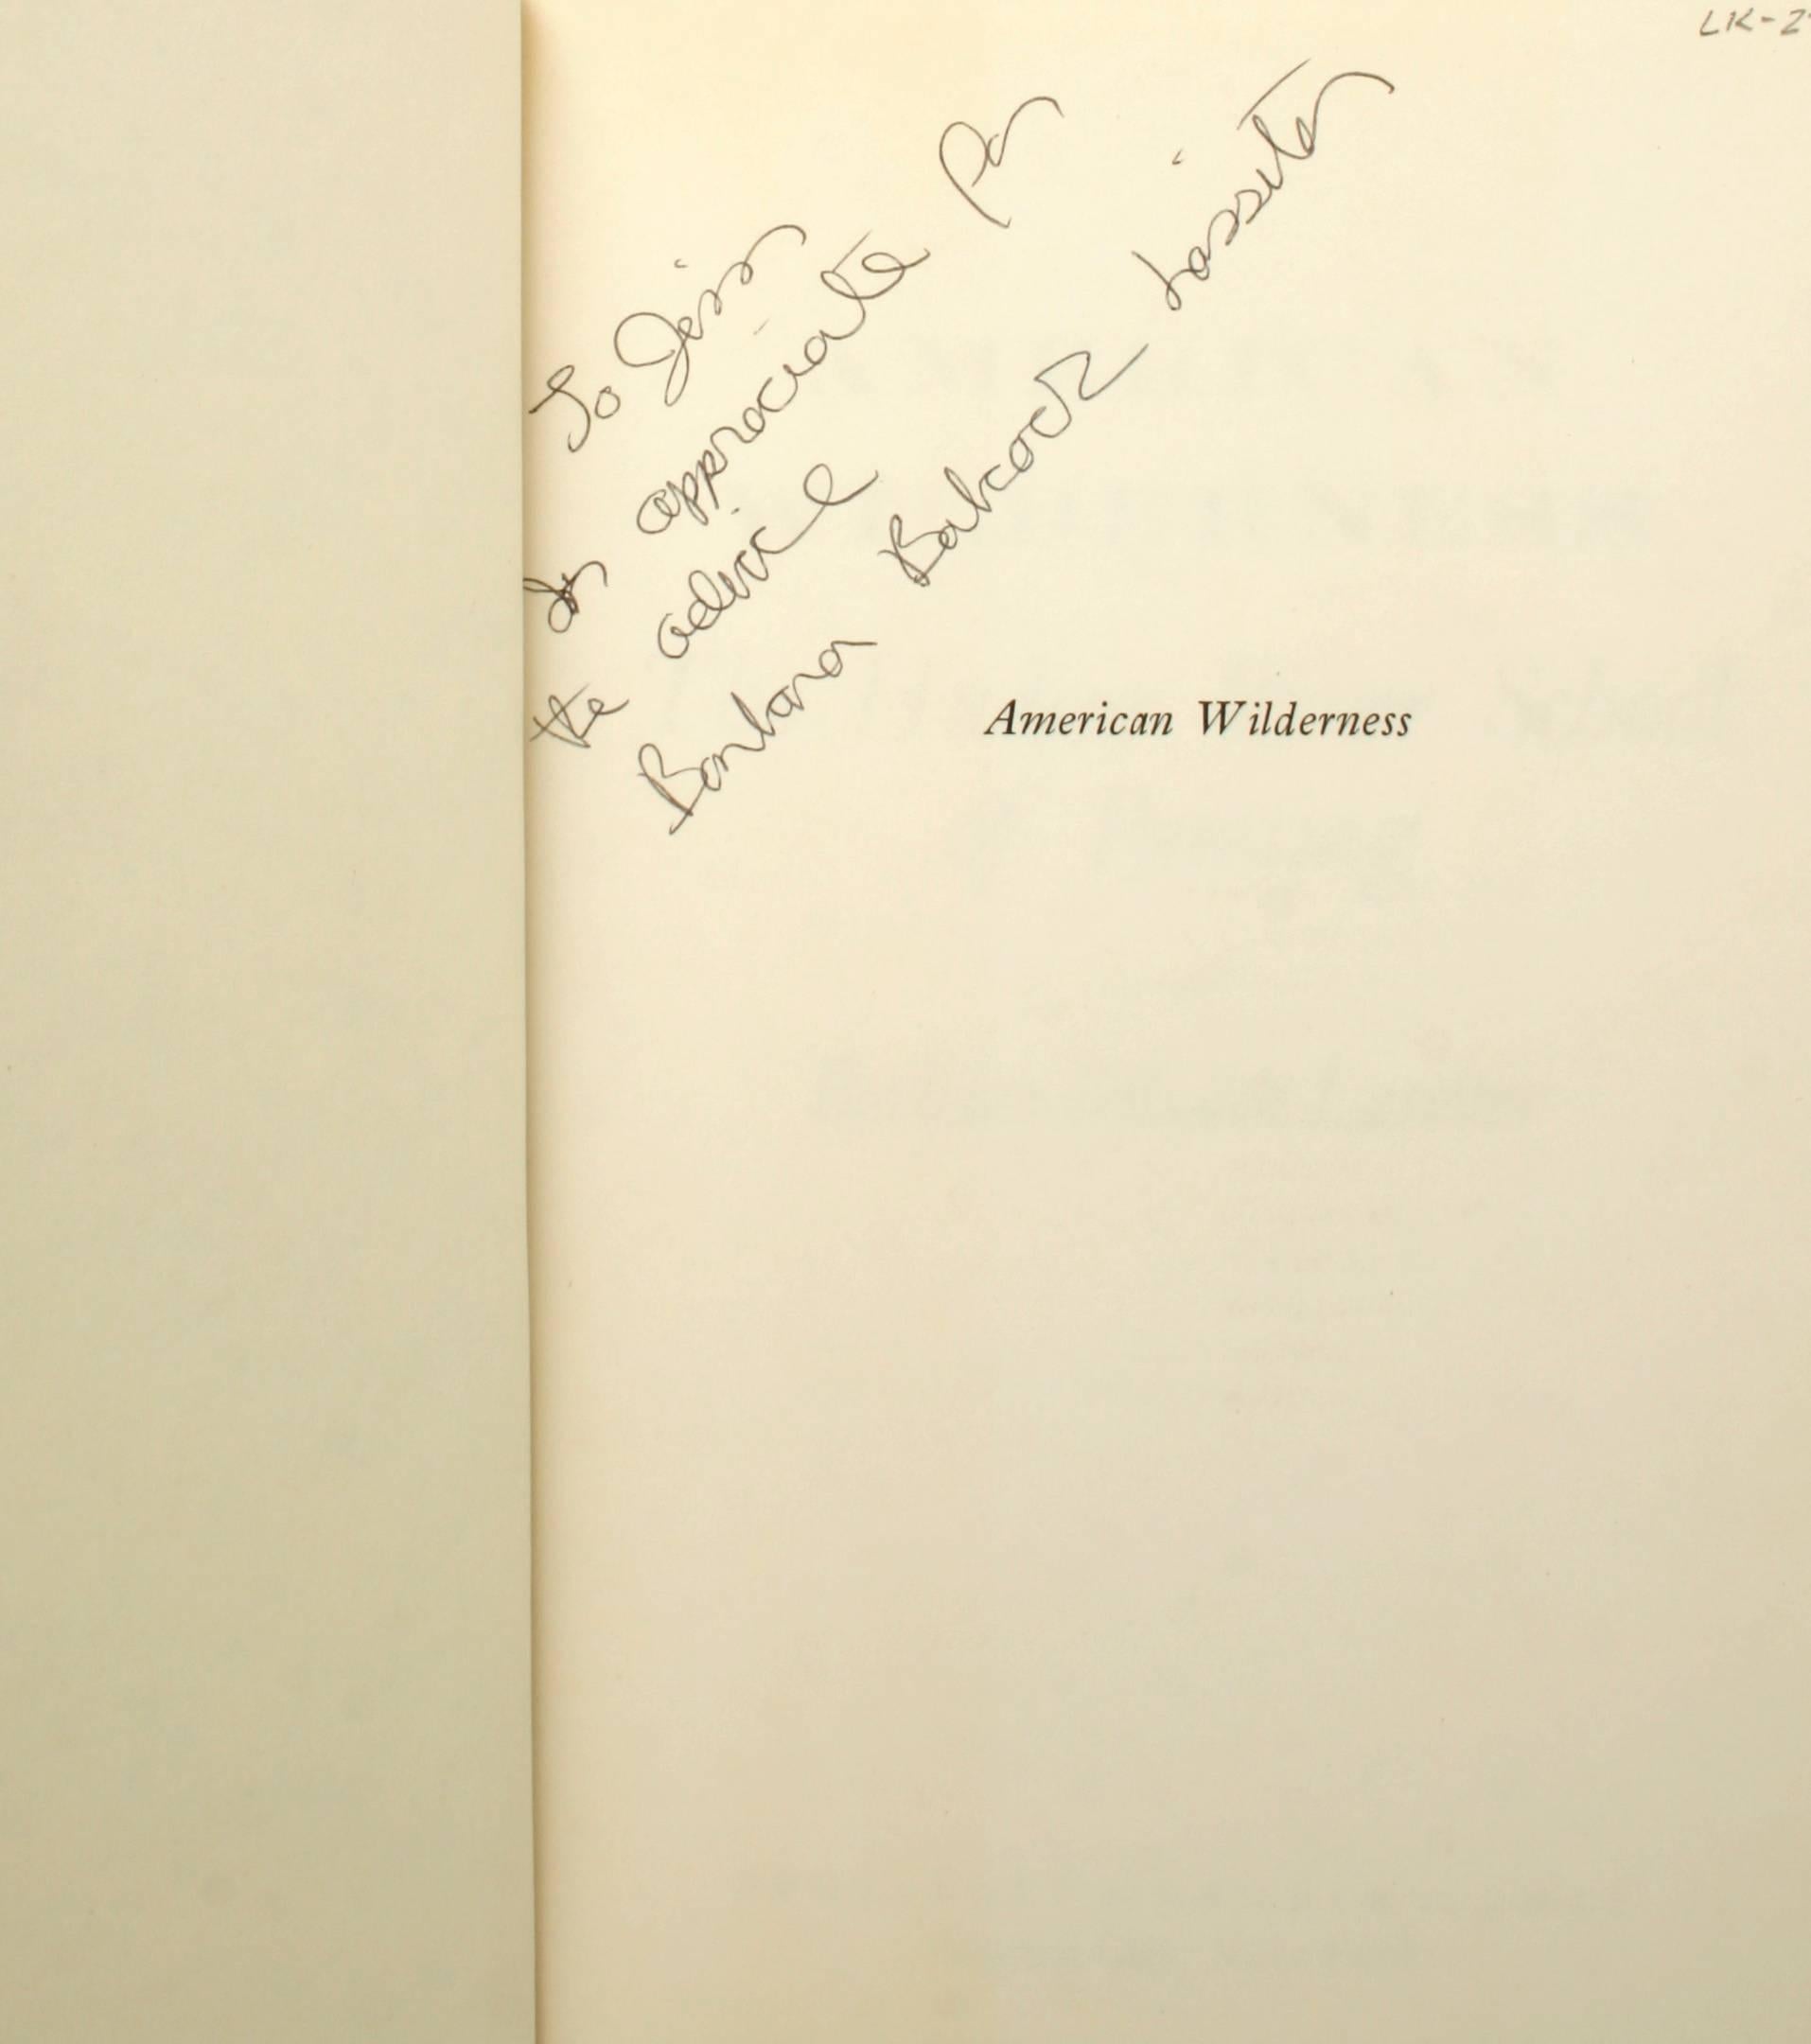 American Wilderness: The Hudson River School of Painting by Barbara B. Lassiter. Doubleday, Garden City, New York, 1978. Stated first edition signed by the author hardcover with dust jacket. Great introduction to one of the most important American